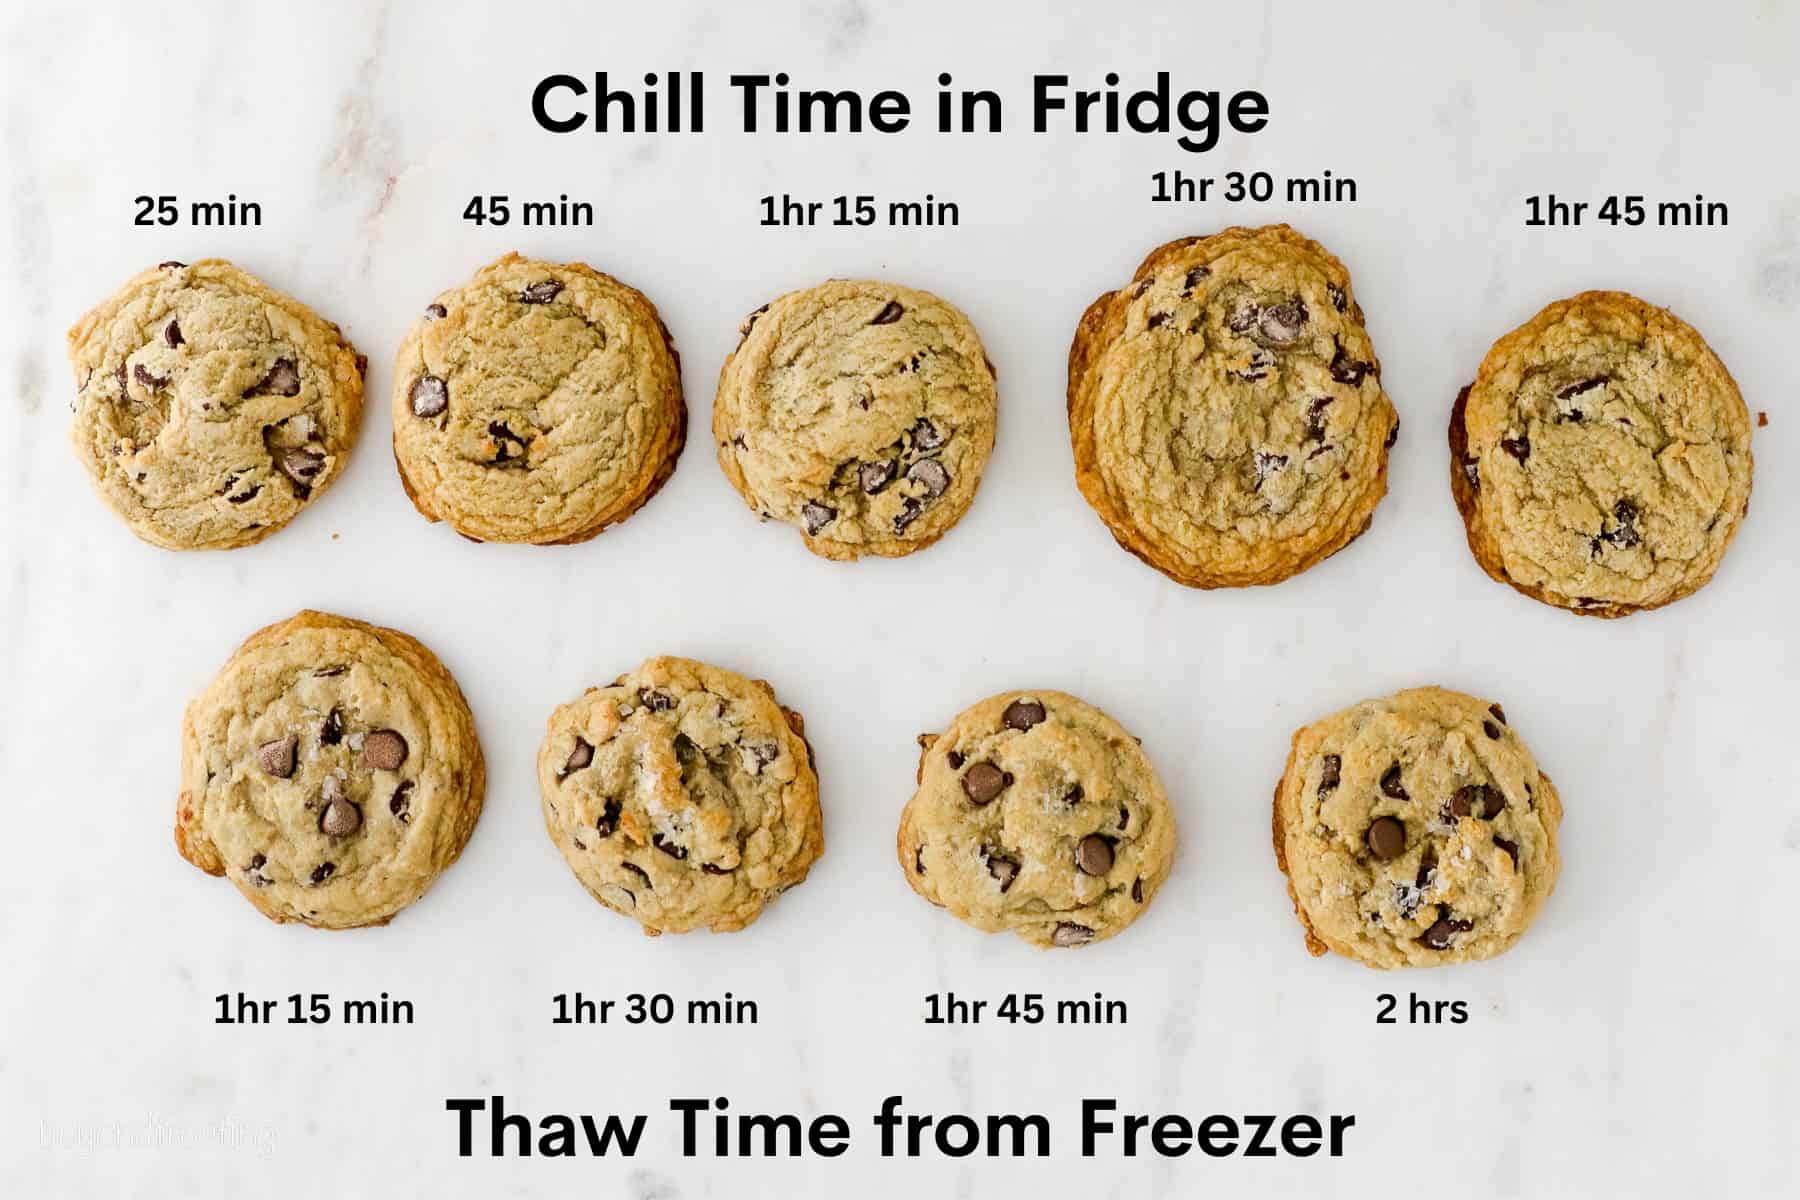 A graphic showing one row of baked cookies after varying times in the fridge, and a second row with baked cookies after various thawing times from the freezer.